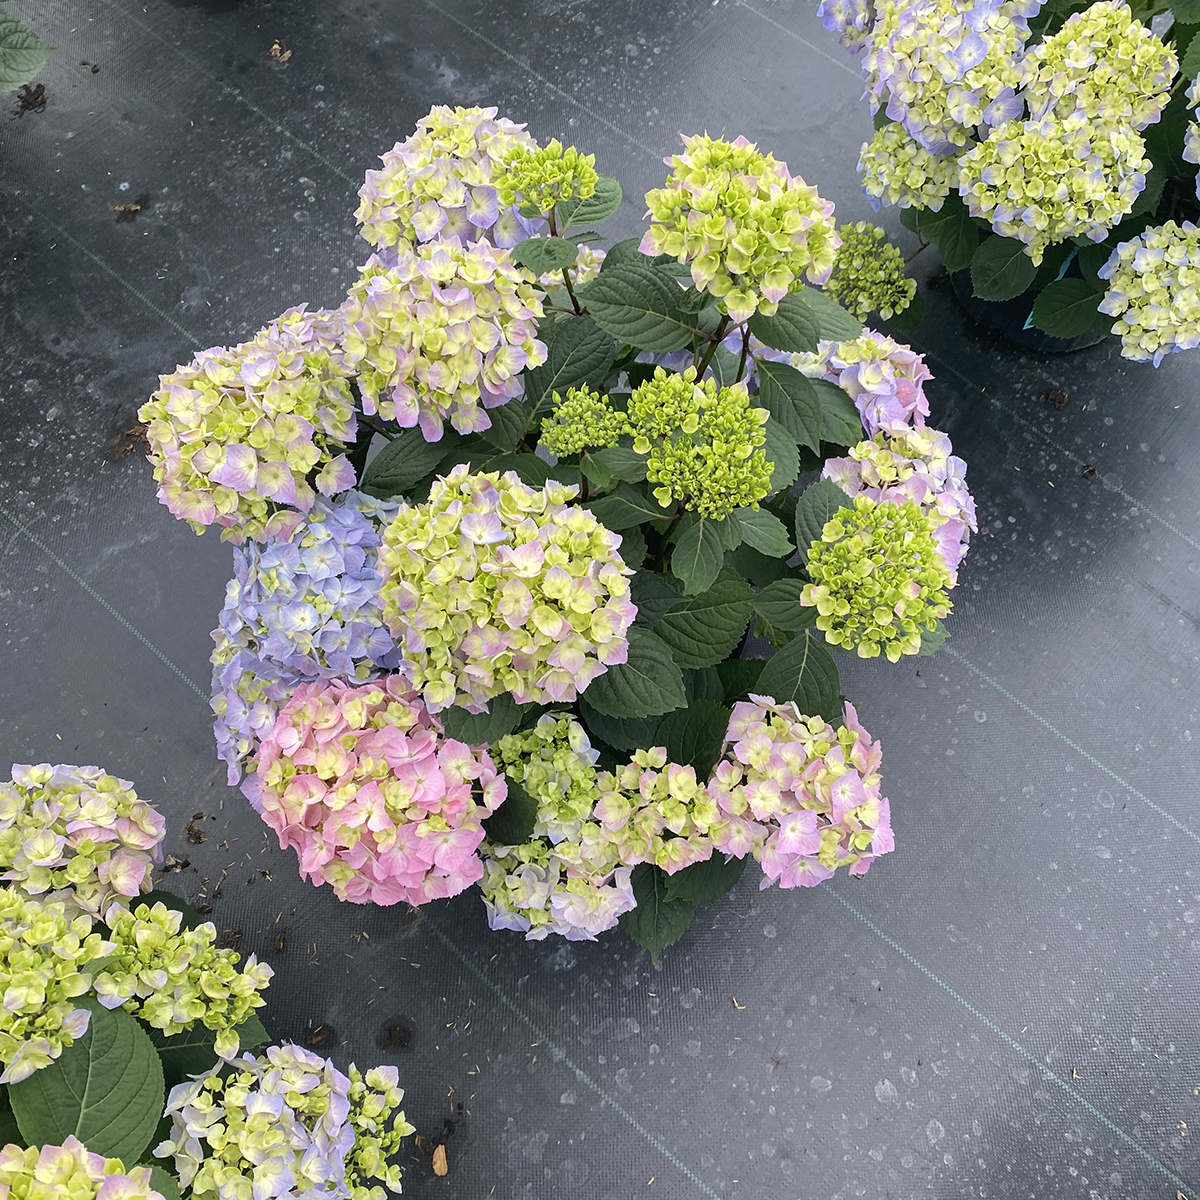 A specimen of Let's Dance Sky View big leaf hydrangea blooming in a greenhouse. 